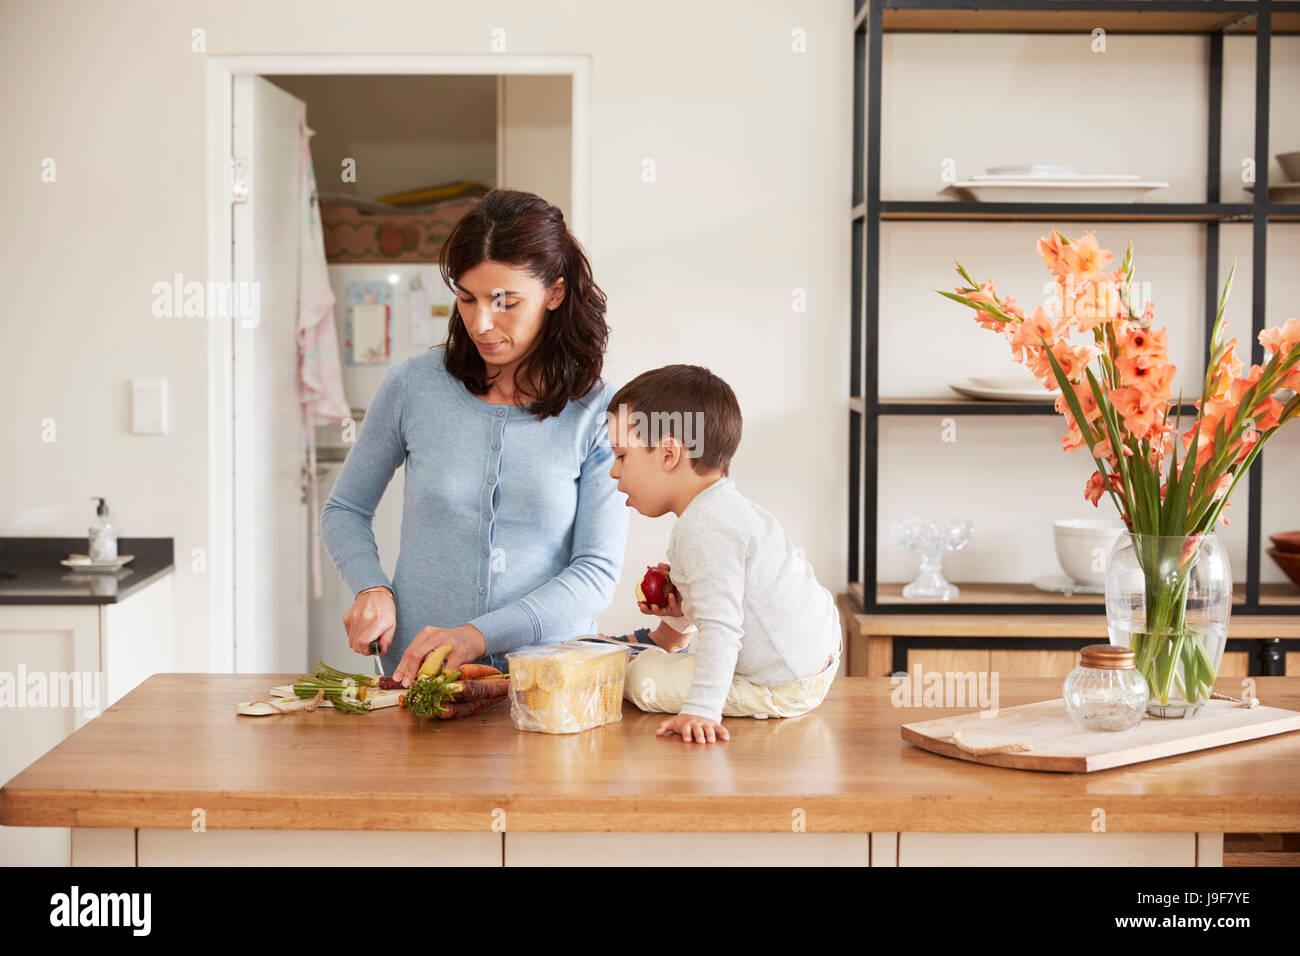 Son Helping Mother To Prepare Food On Kitchen Island Stock Photo